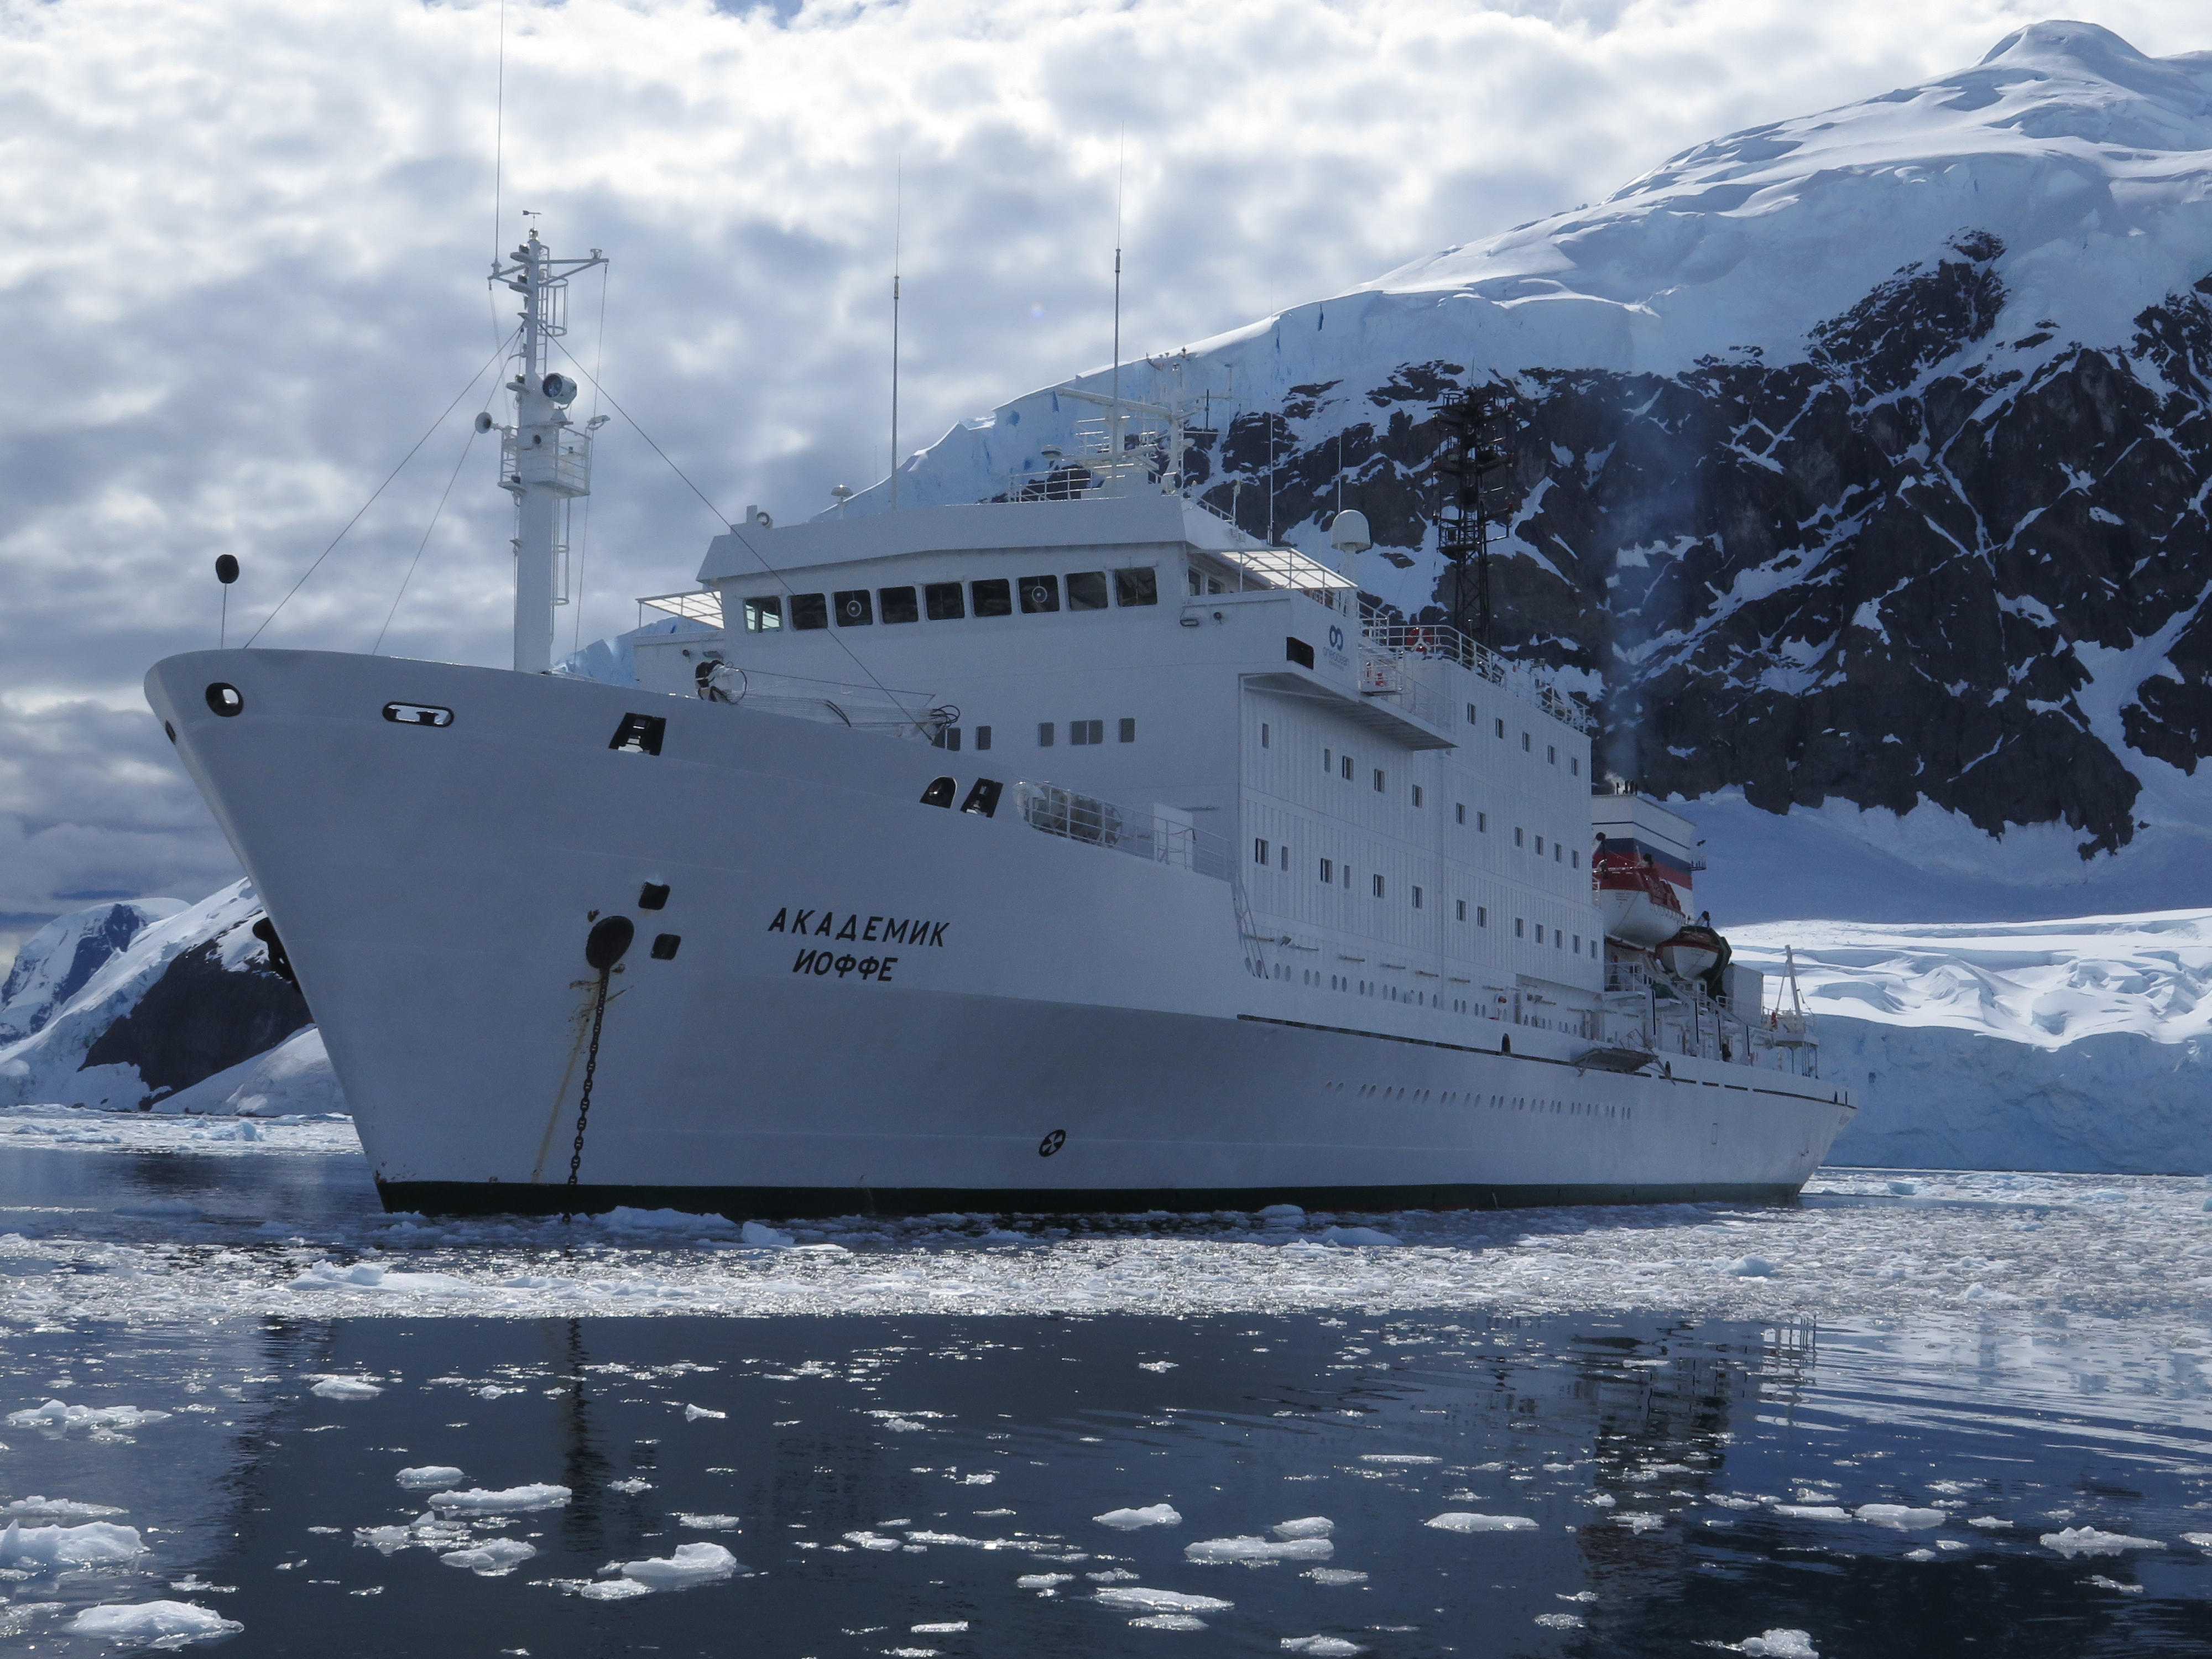 The Akademik Ioffe - One Ocean Expeditions - Photo by The Backpacker Intern